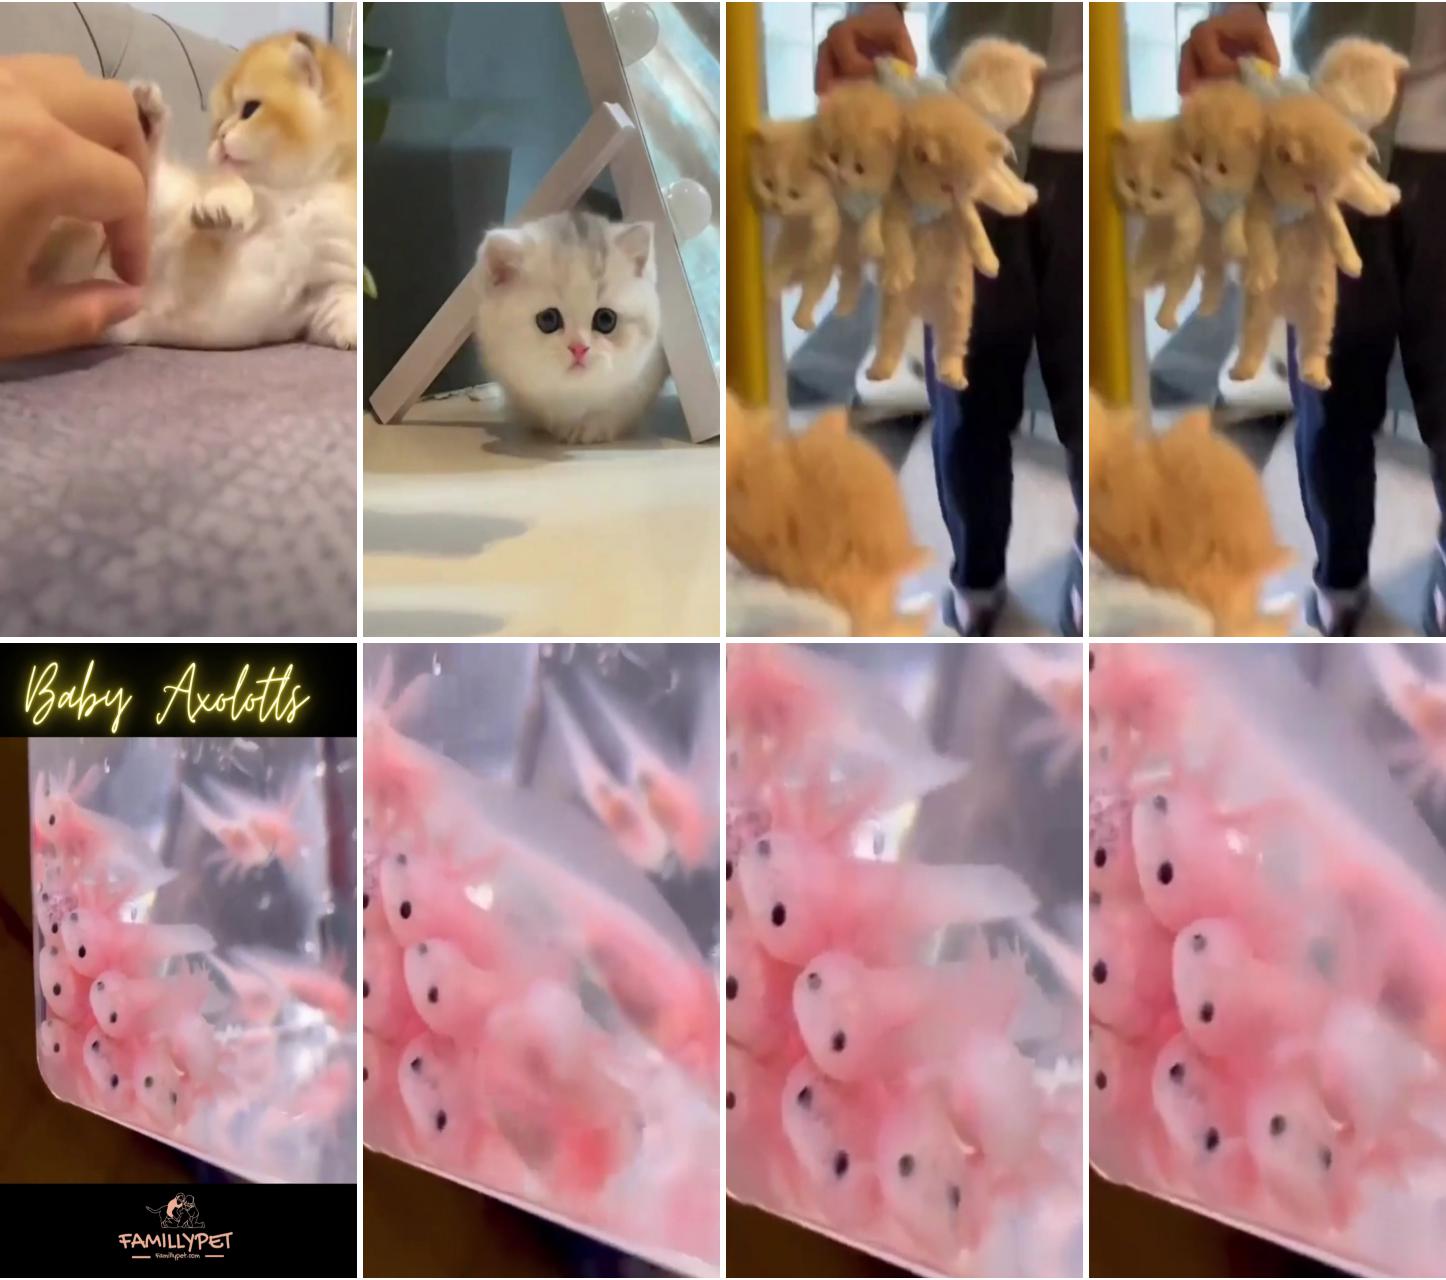 Kitty comedy: cats being hilariously cute; the cutest baby axies ever